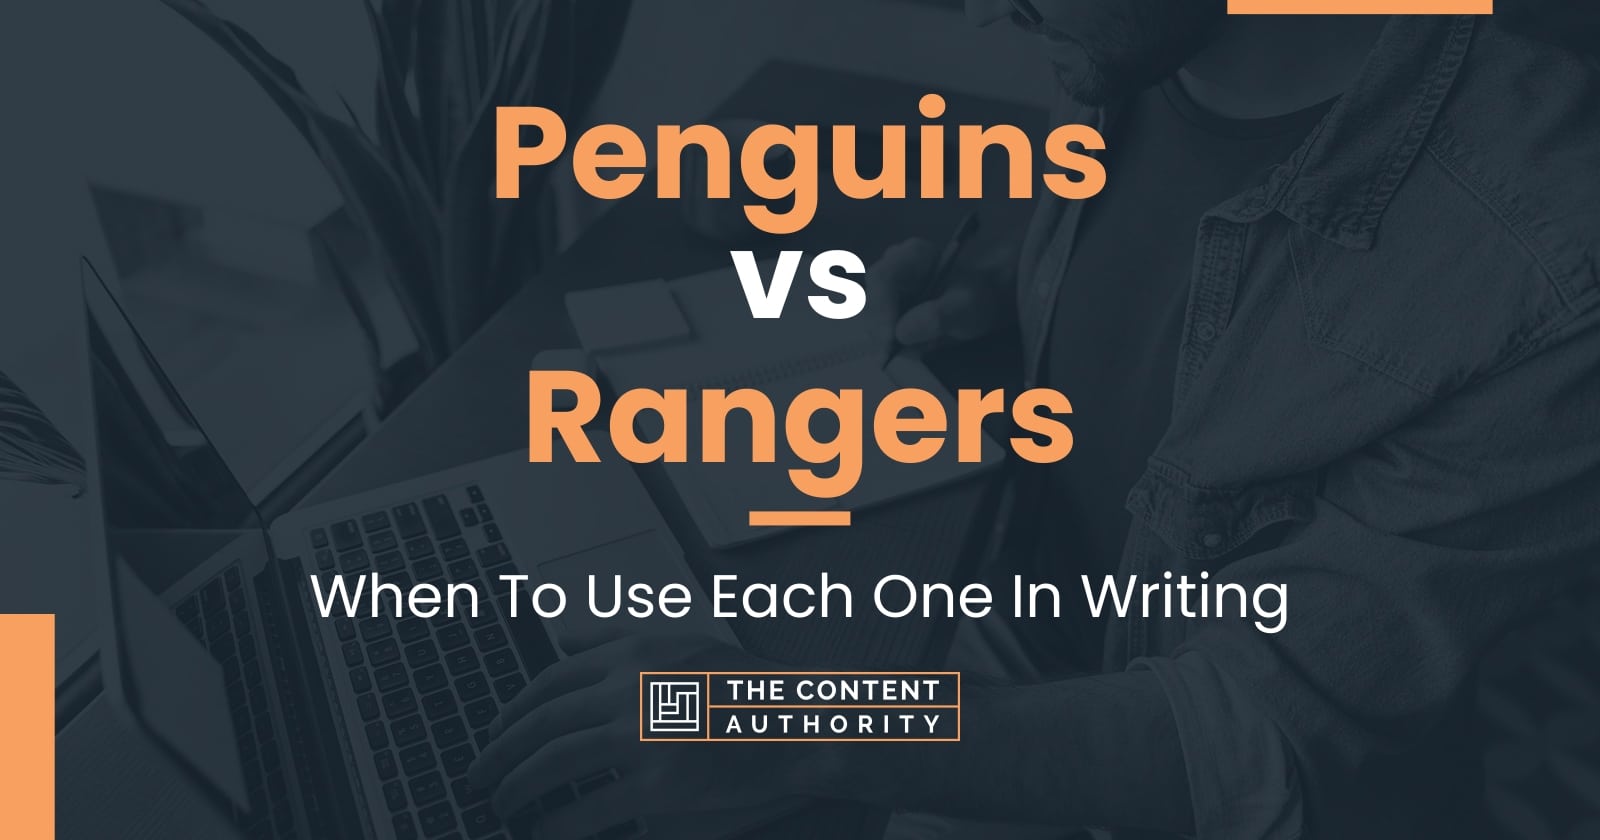 Penguins vs Rangers When To Use Each One In Writing